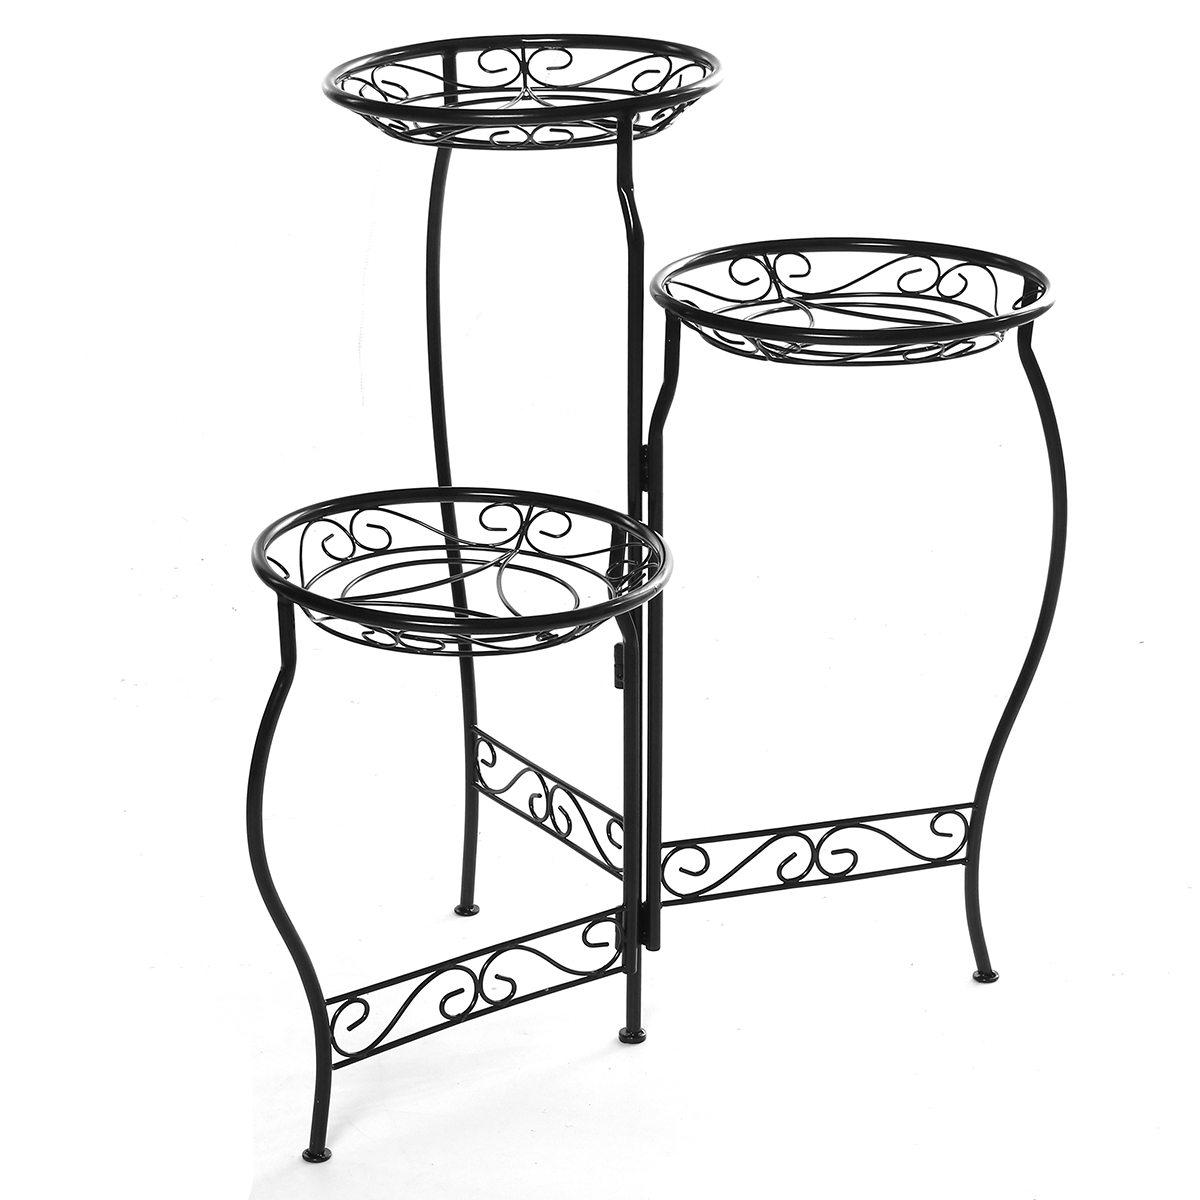 Metal-Flower-Pot-Stand-3-Tiers-Rounded-Plant--Holder-Indoor-Outdoor-Flower-Plant-Stand-Displaying-Ra-1797075-8